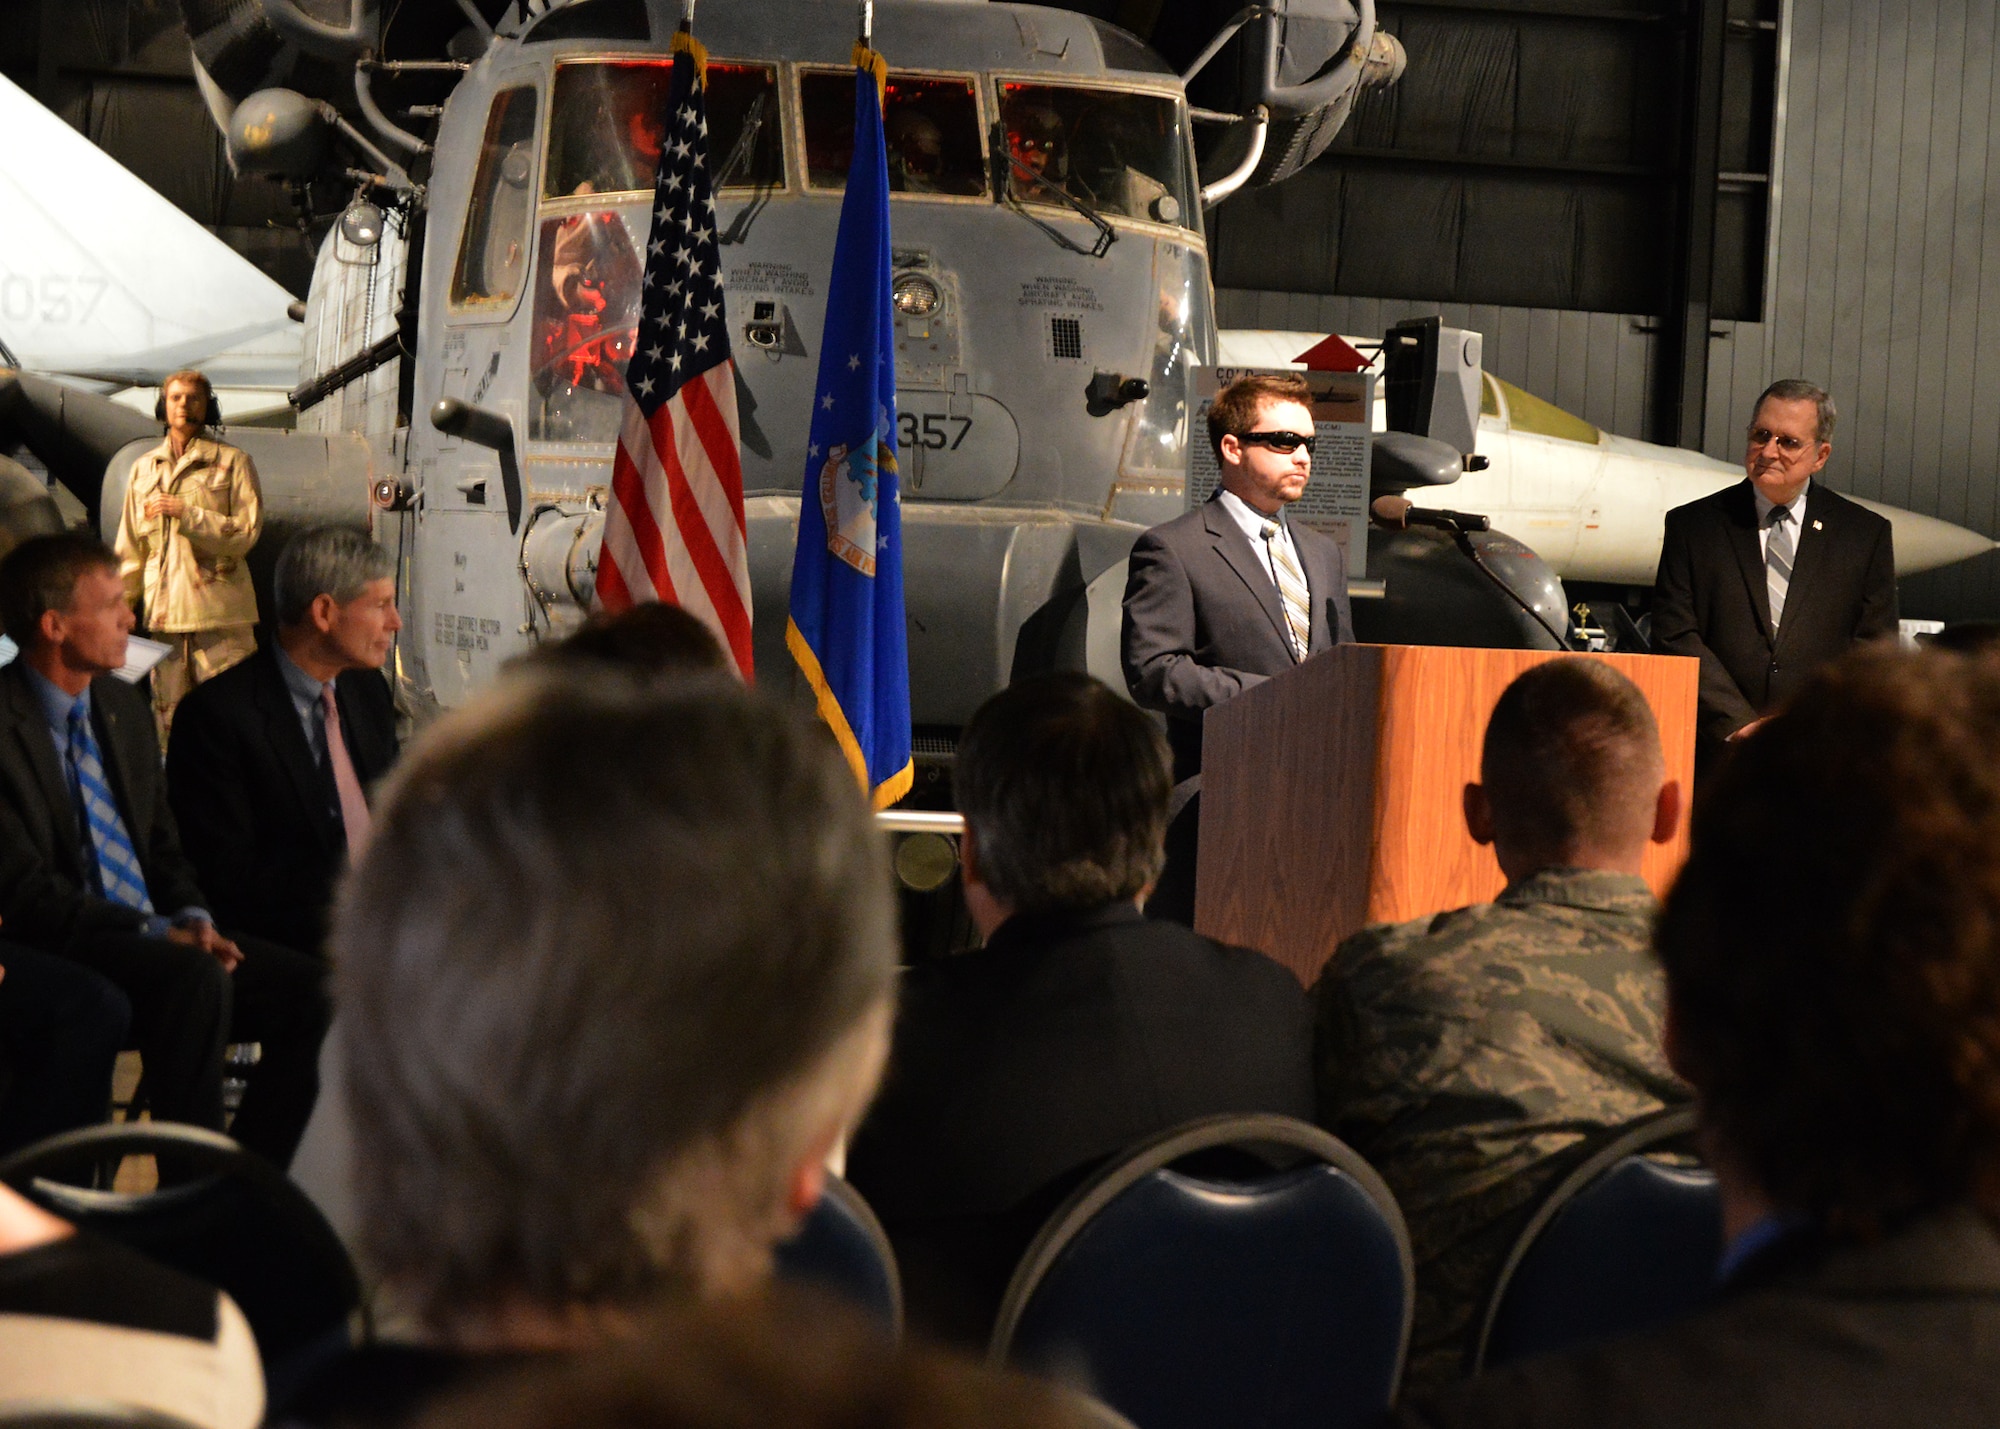 DAYTON, Ohio -- SSgt.(Ret.) Mike Malarsie speaks at the "Duty First, Always Ready" exhibit opening on Jan. 23, 2015 in the Cold War Gallery at the National Museum of the U.S. Air Force. (U.S. Air Force photo)